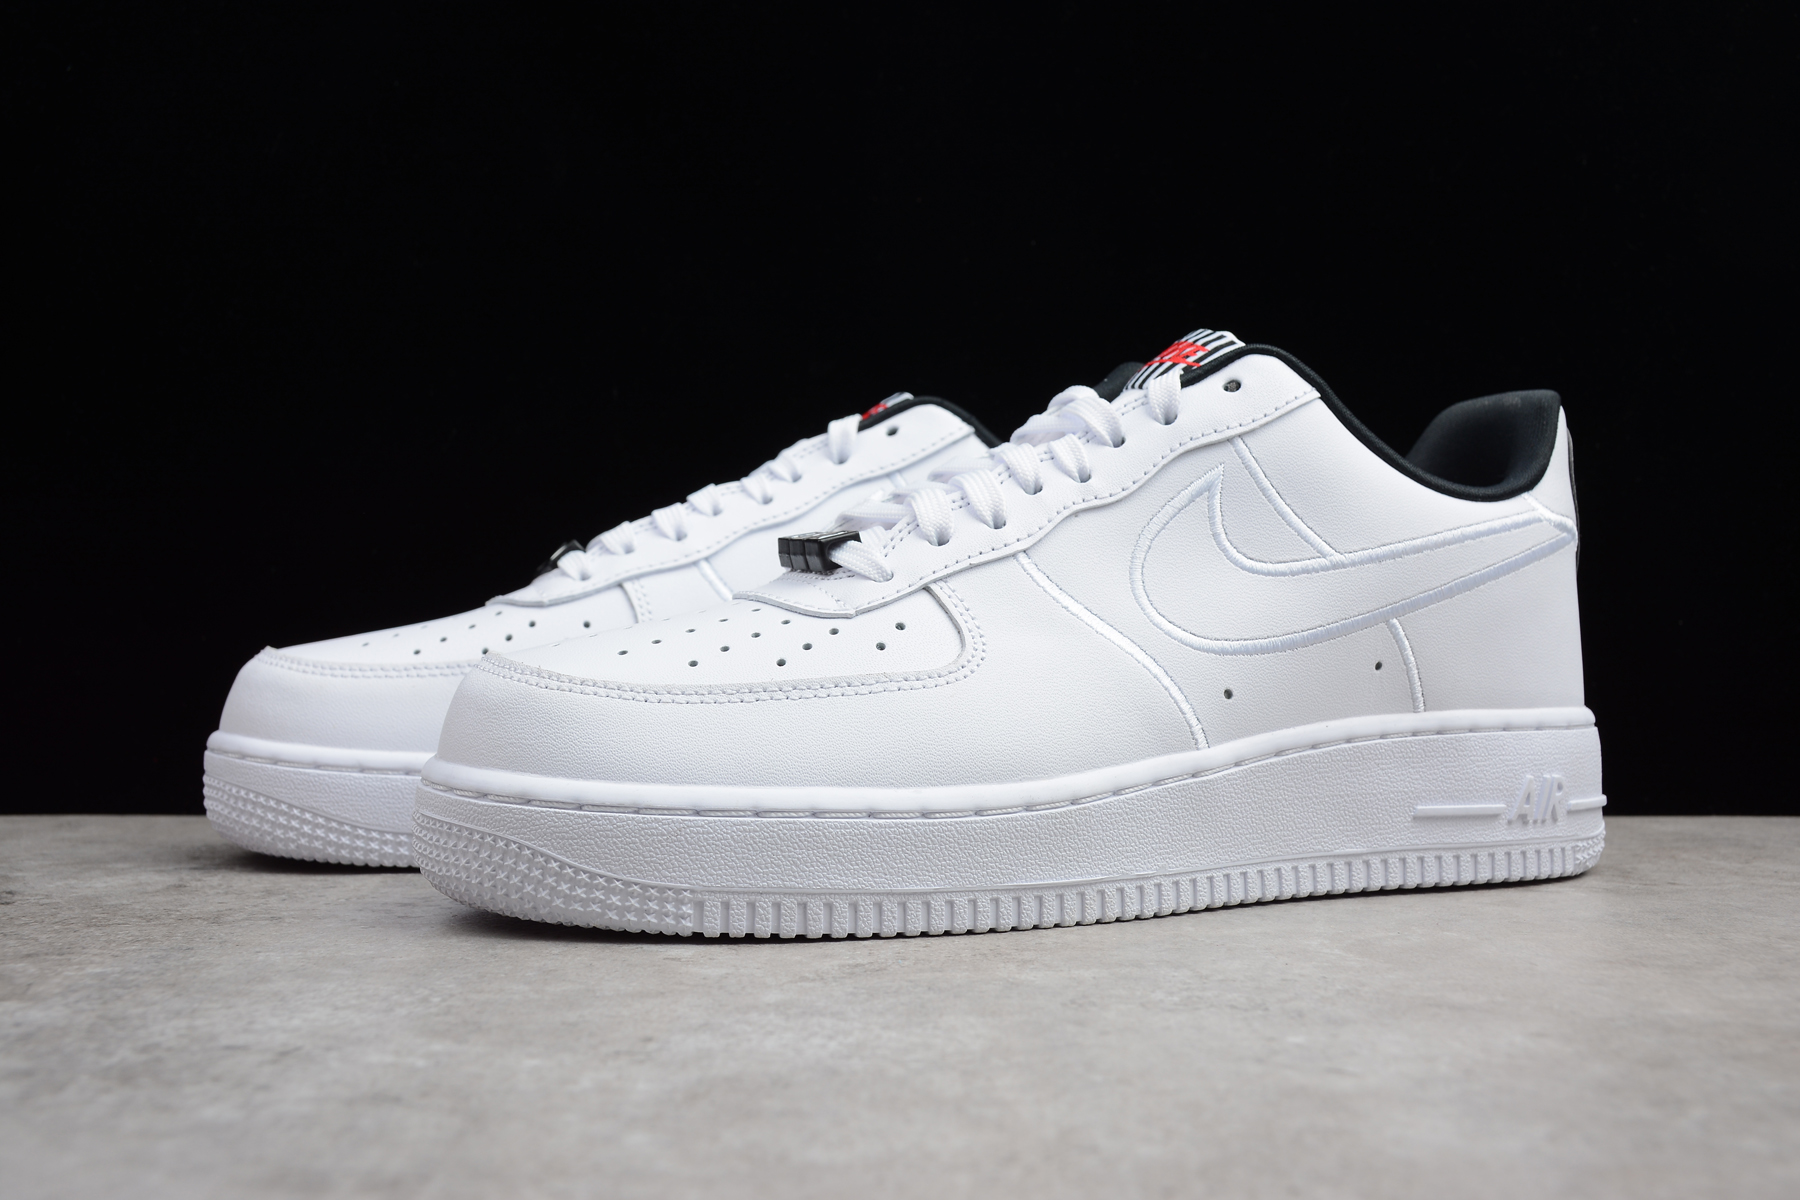 Air force 1 low valentine s day. Nike Air Force 1 Low Valentines Day. Nike Air Force 1 Low “Valentine’s Day” 2023. Nike Air Force 1 Low Valentine White. Nike Air Force 1 Low Valentines Day 2022.